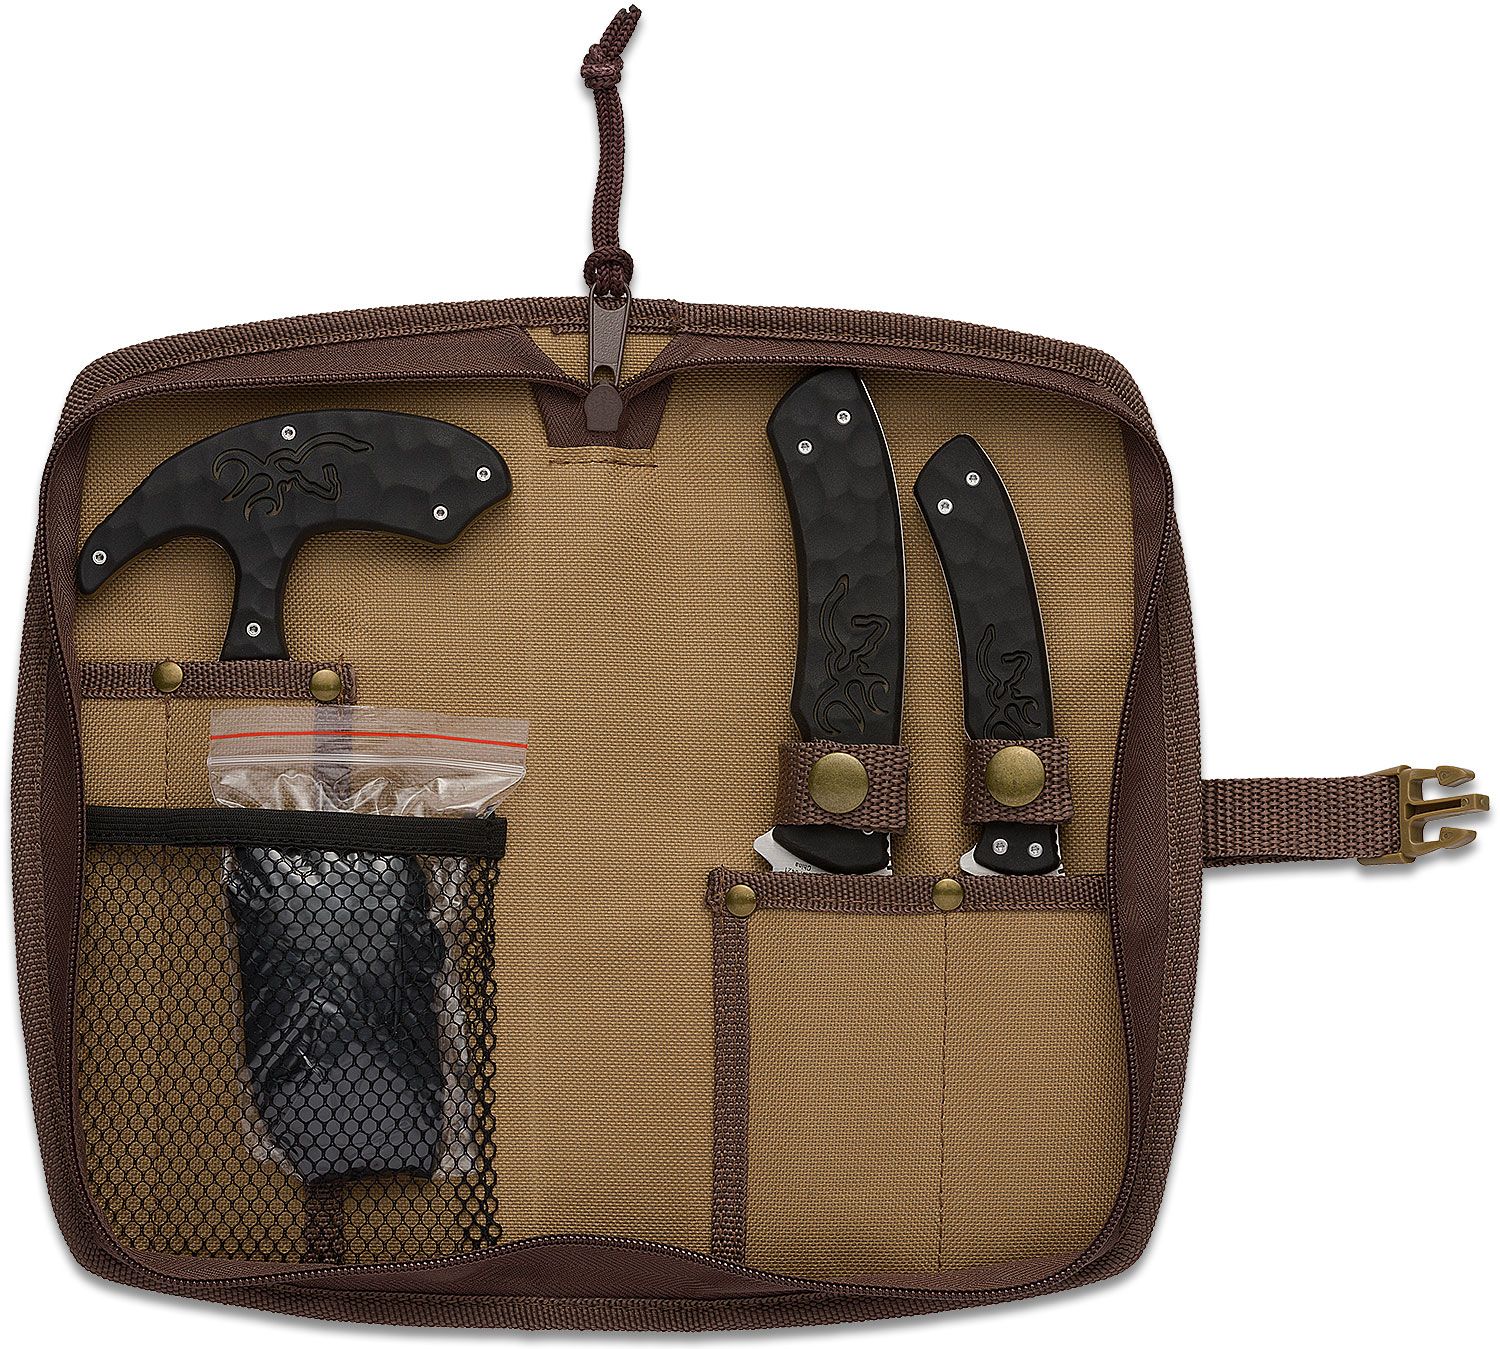 Browning Primal 6 Piece Knife and Saw Set, Orange Rubber Overmold Handles,  OVIX Camo Nylon Case - KnifeCenter - 3220482